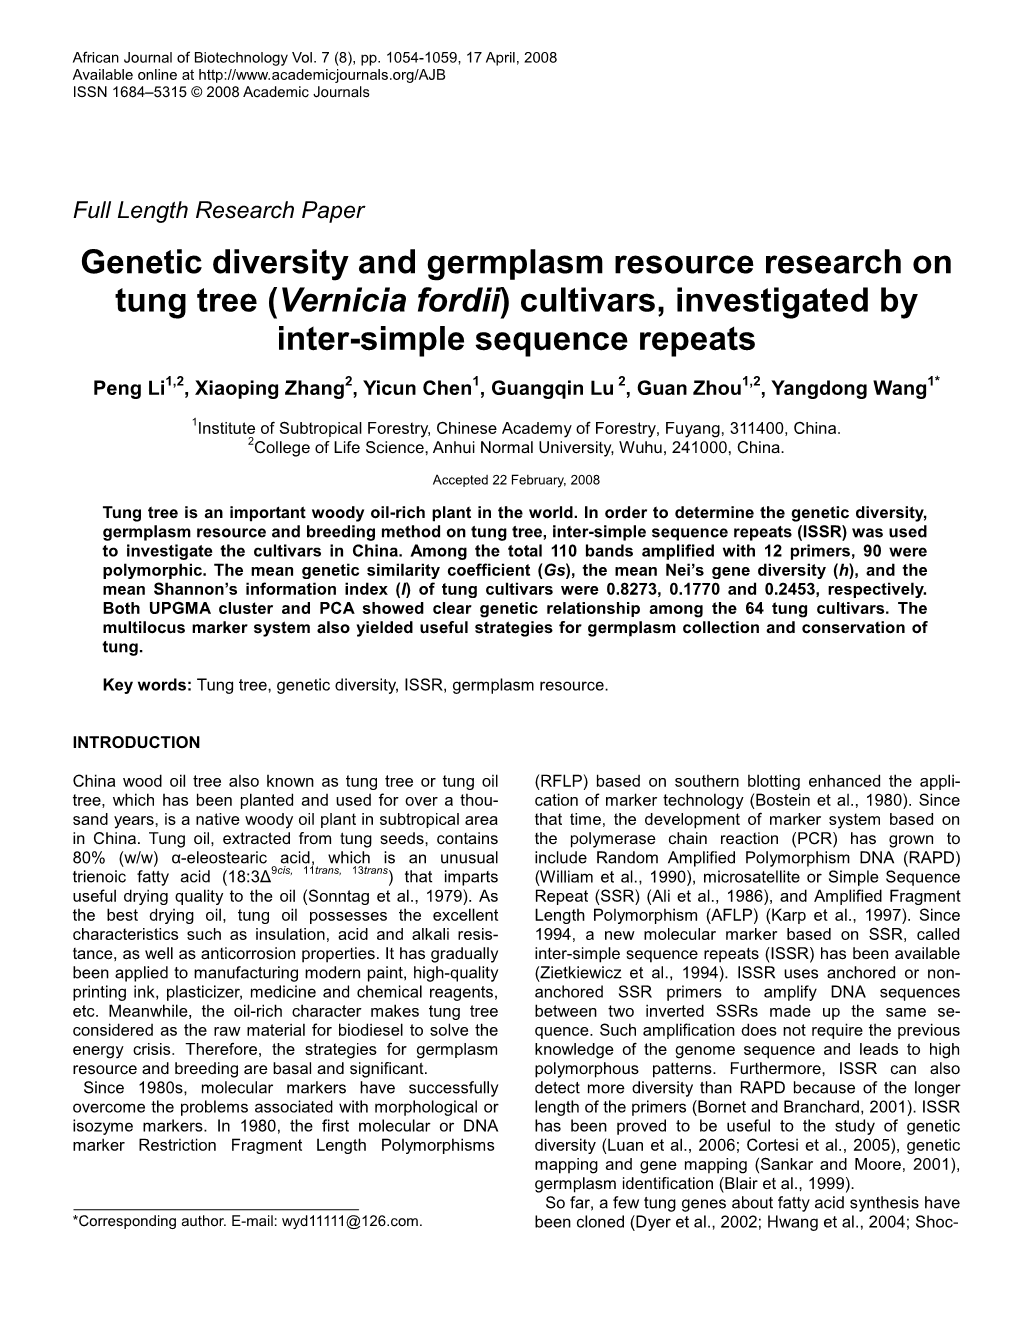 Genetic Diversity and Germplasm Resource Research on Tung Tree (Vernicia Fordii) Cultivars, Investigated by Inter-Simple Sequence Repeats